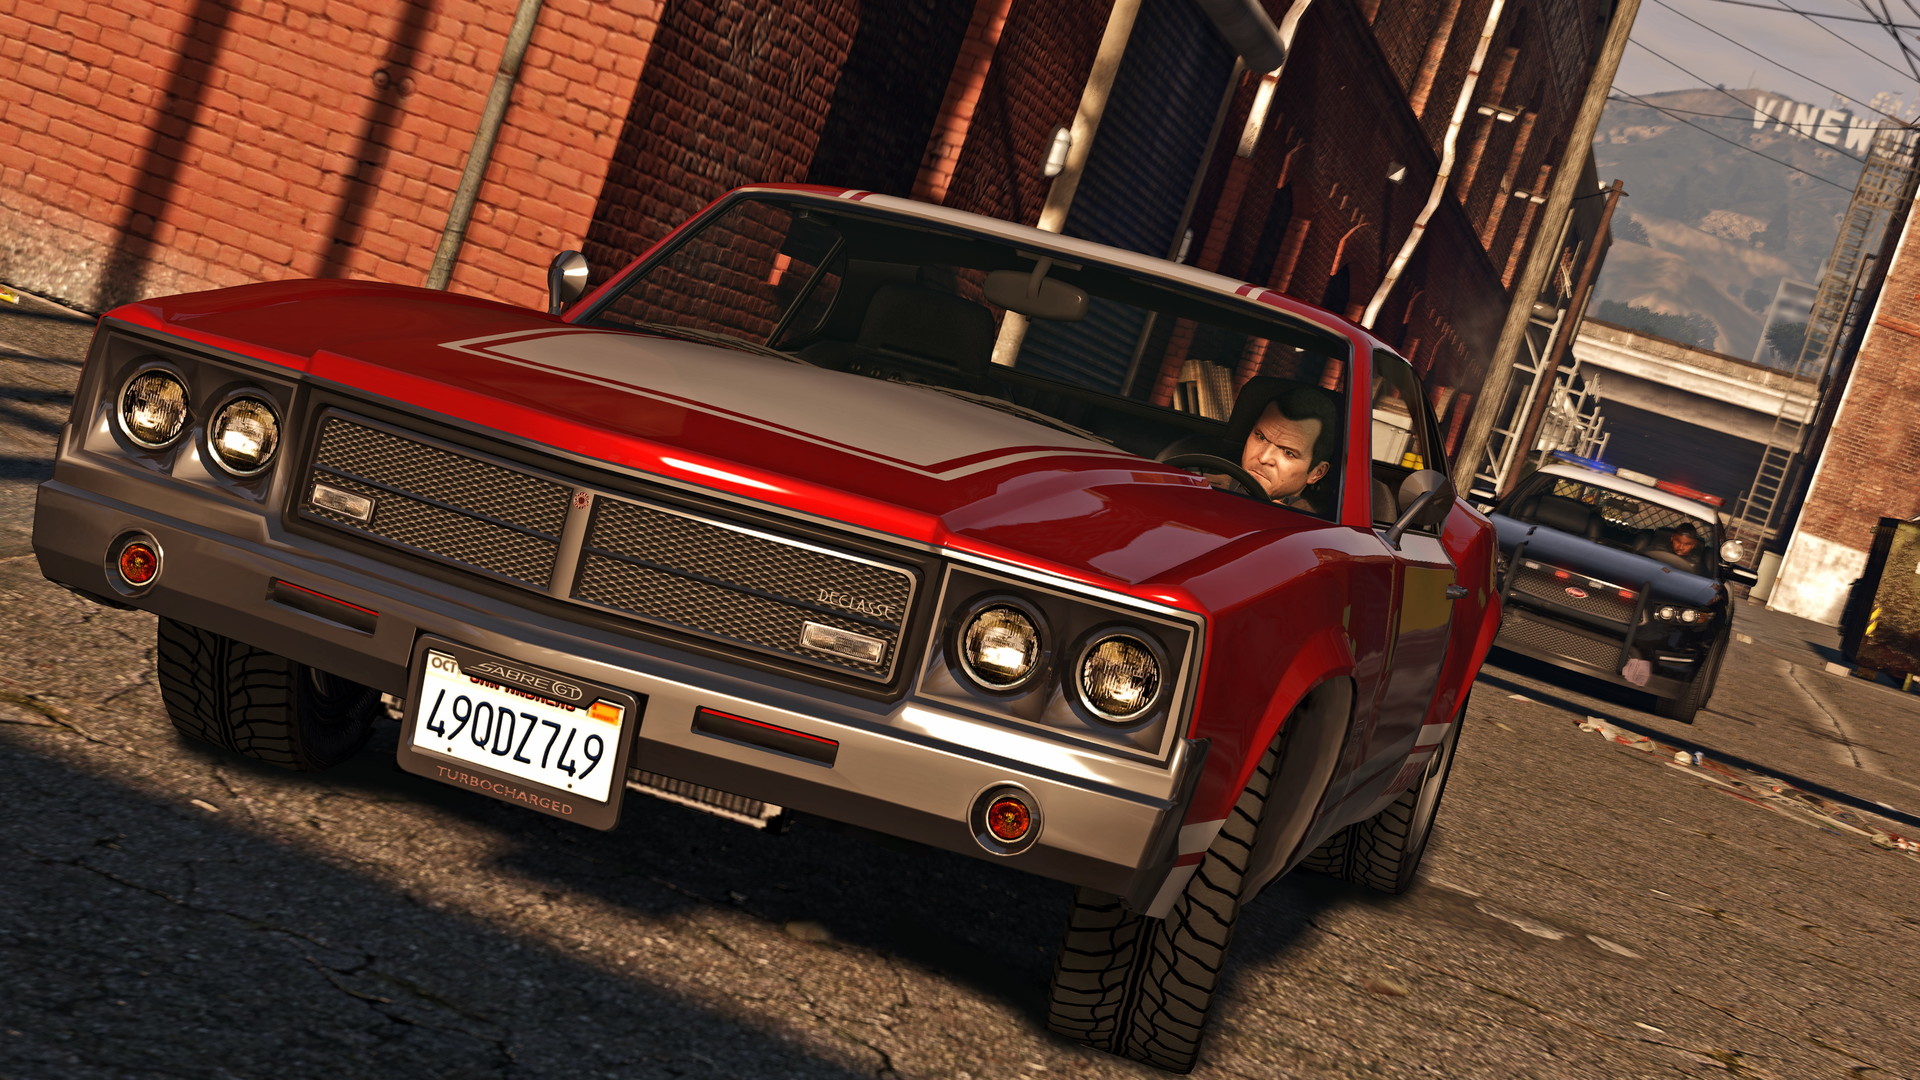 Michael drives a red muscle car in GTA 5